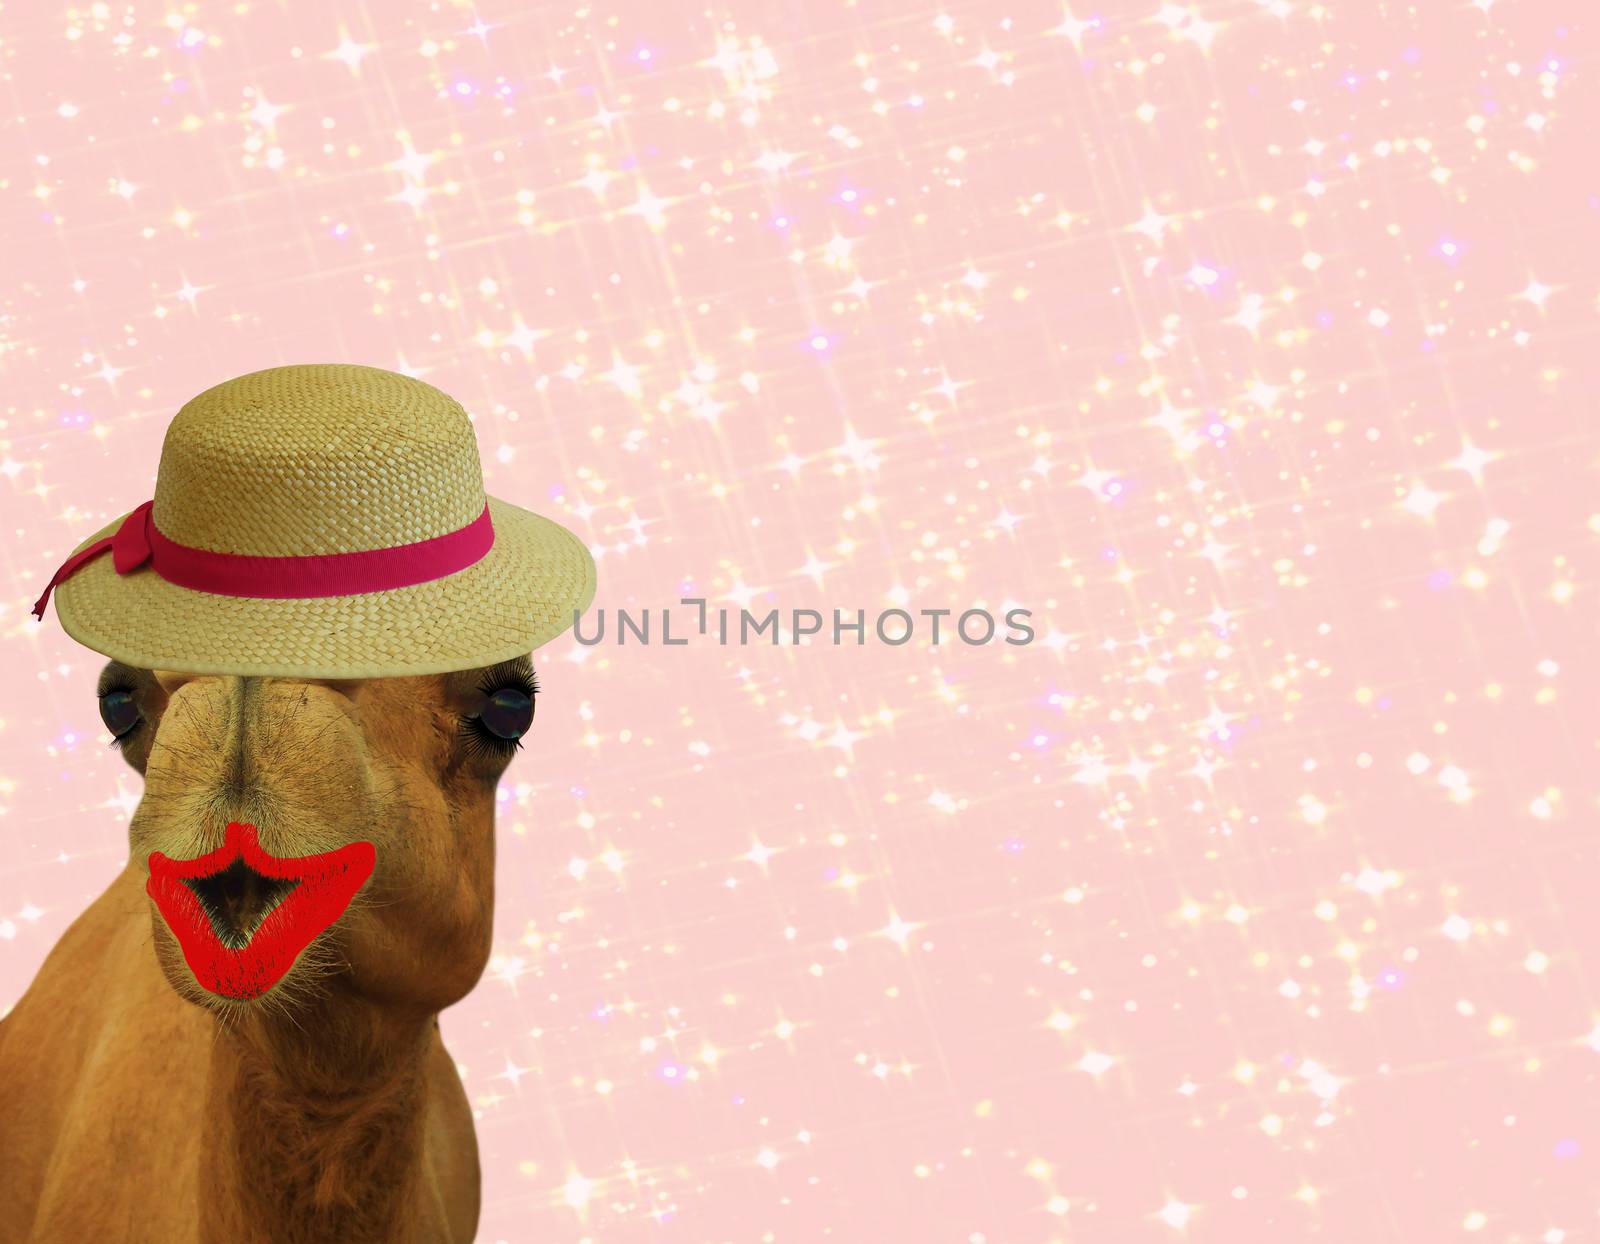 funny camel in make up with lipstick eye lashes and straw hat isolated on pink glittery girly background